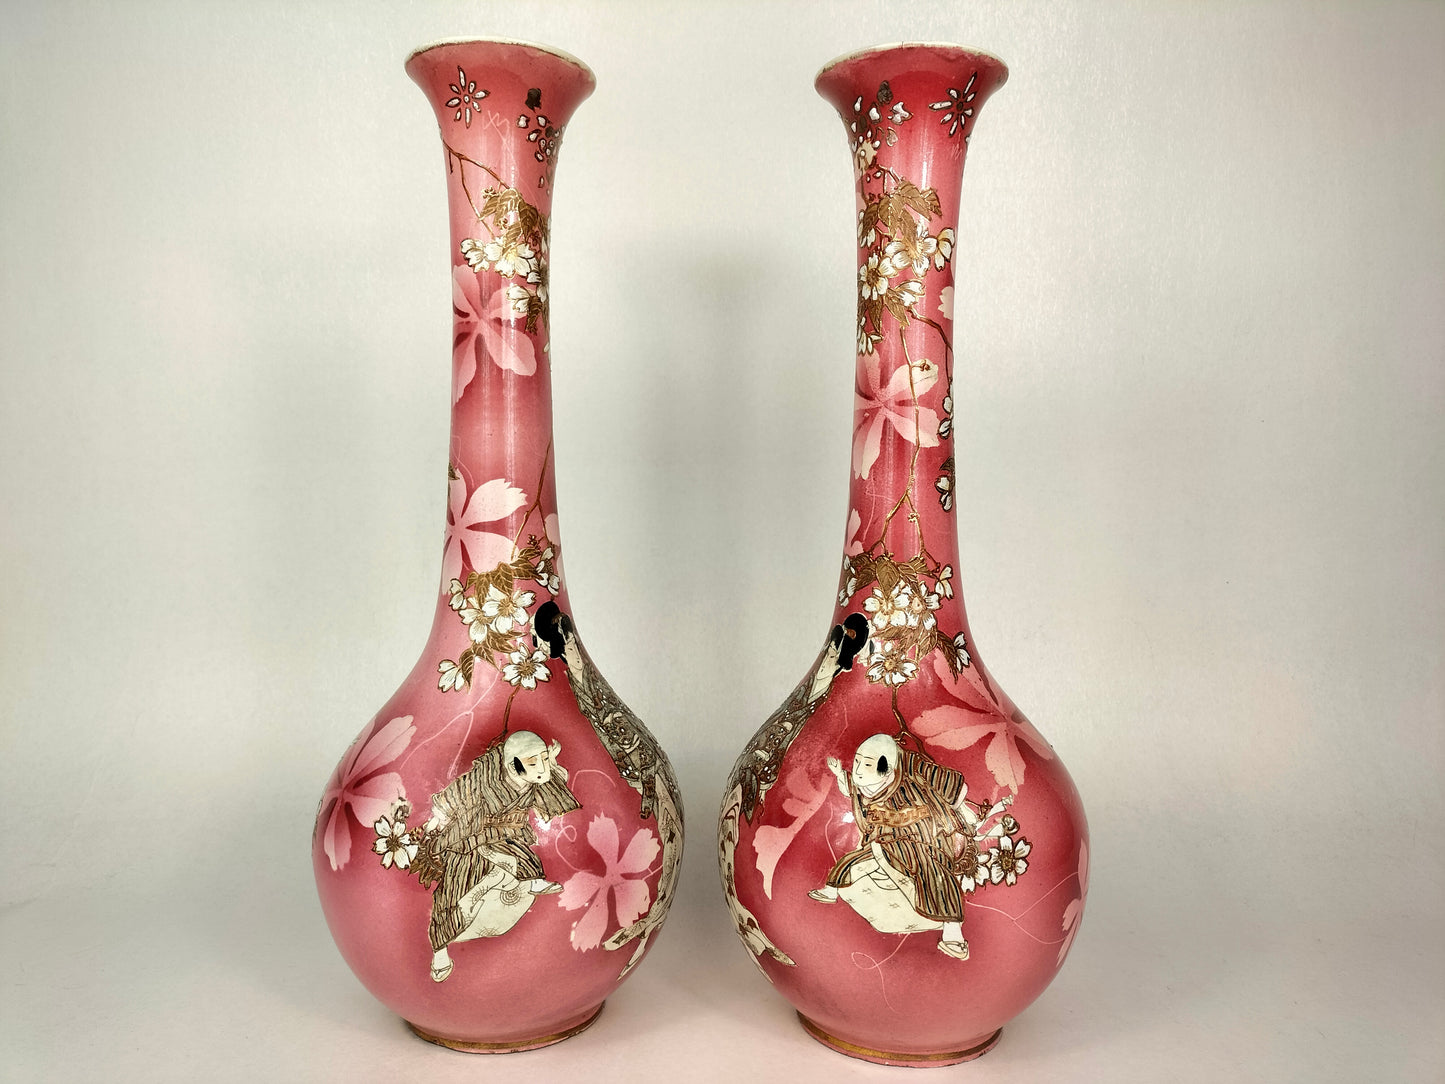 Pair of large antique Japanese satsuma vases decorated with figures // Early 20th century - Meiji period